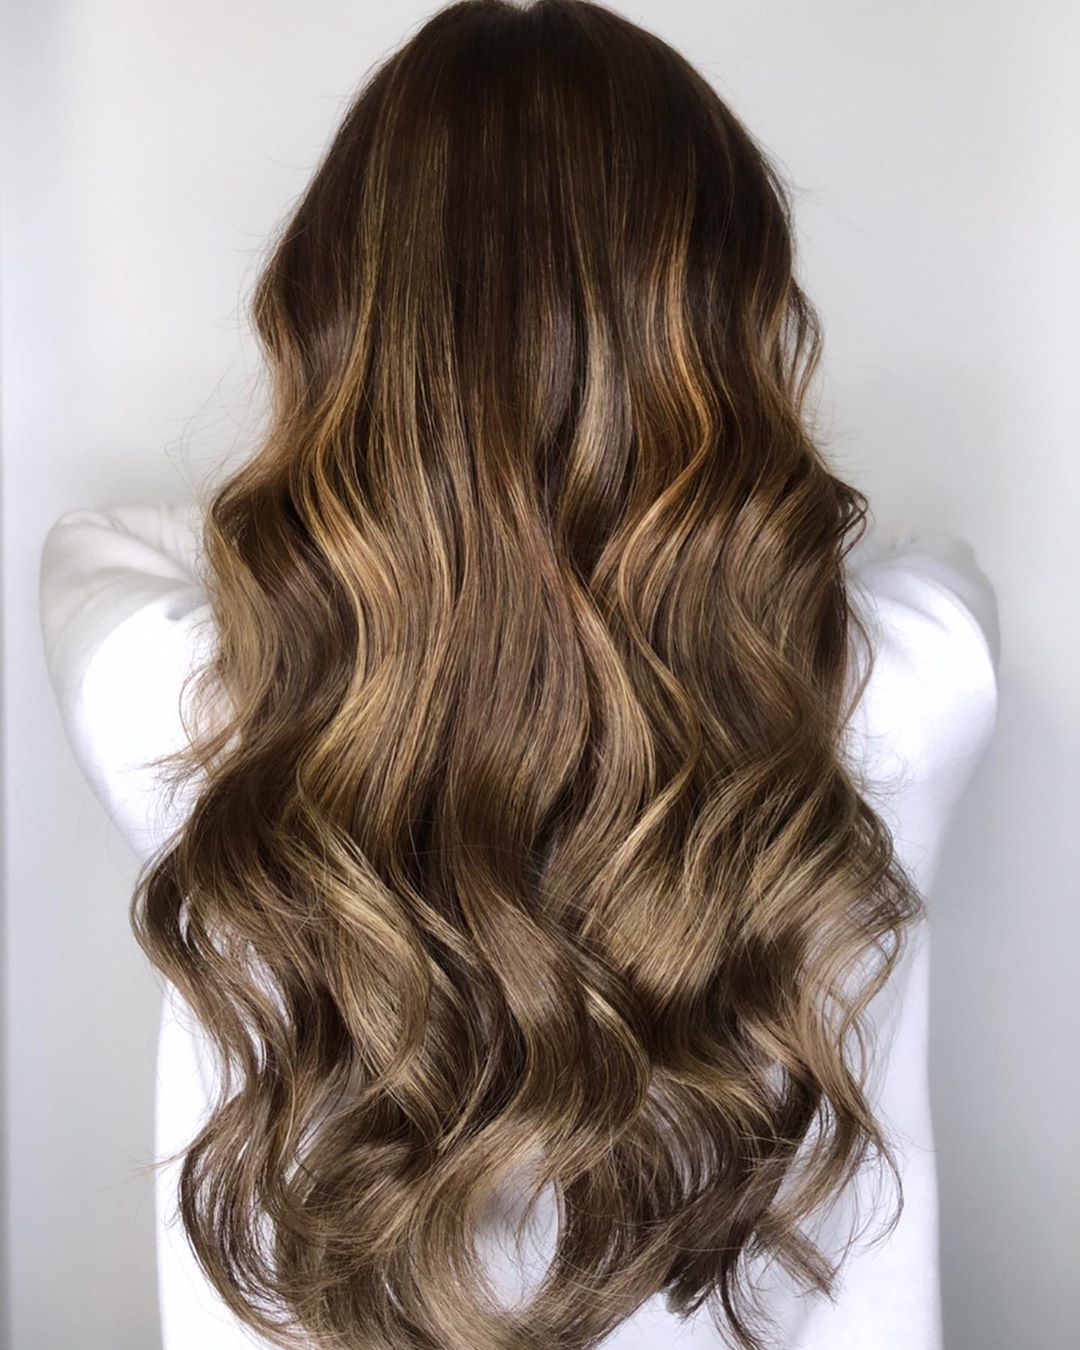 Light Golden Brown Hair Color: What It Looks Like &amp; 17 Trendy Ideas